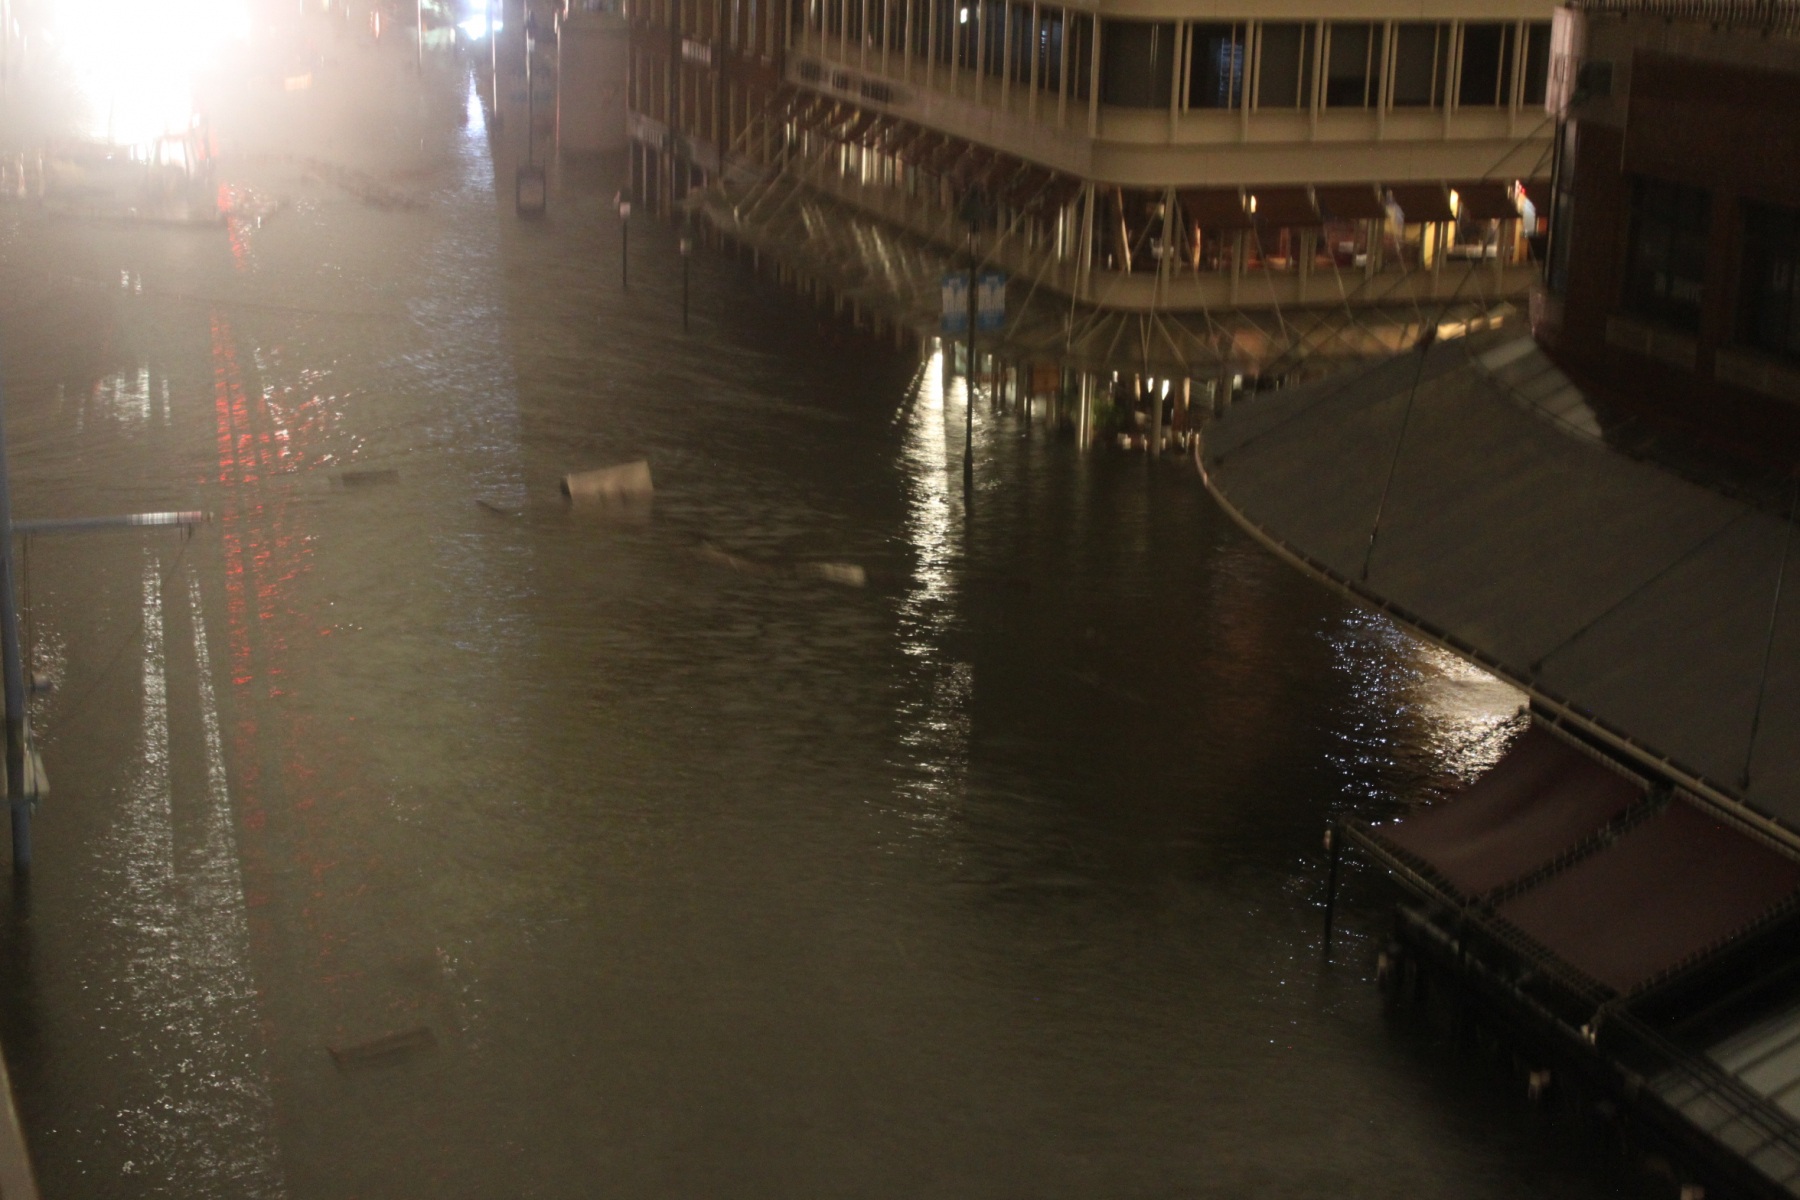 Nighttime photograph of the devastation of Hurricane Sandy on Fulton and Front Streets